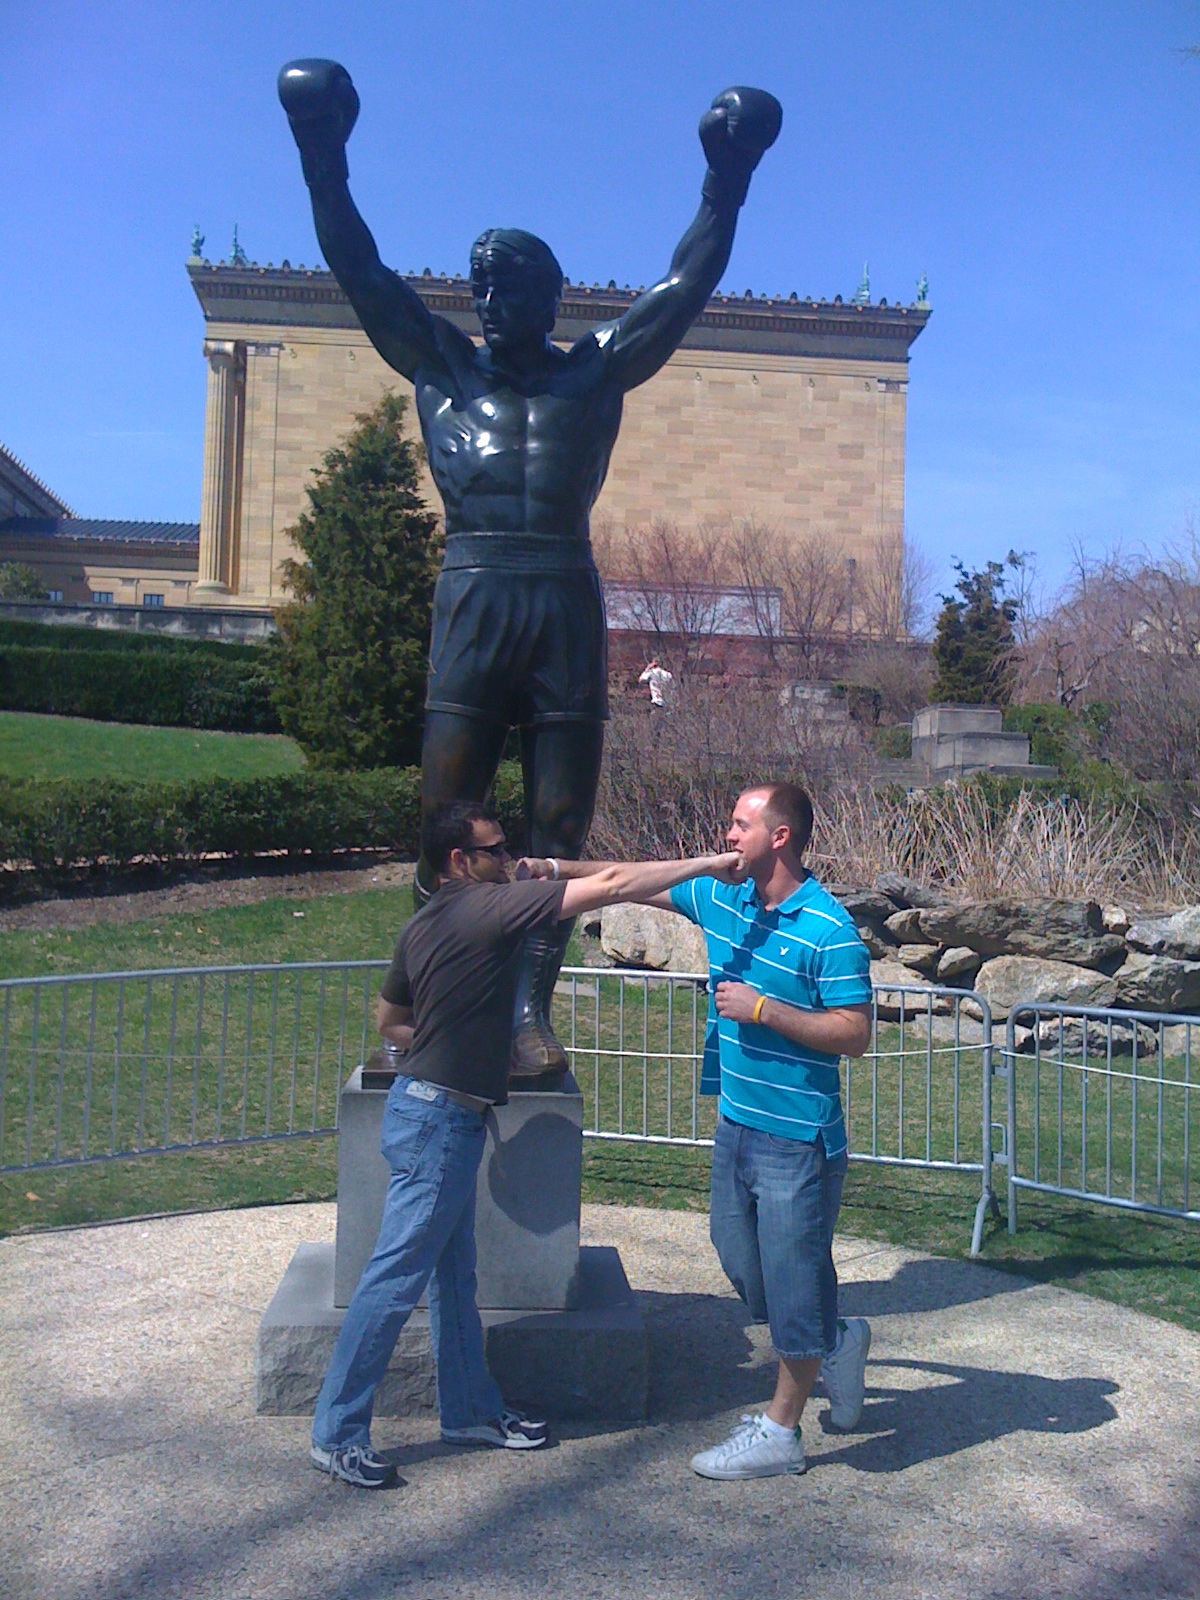 My boy Mike and i in Philadelphia, where one of the worlds most iconic set foot! Go Sylvester Stallone.